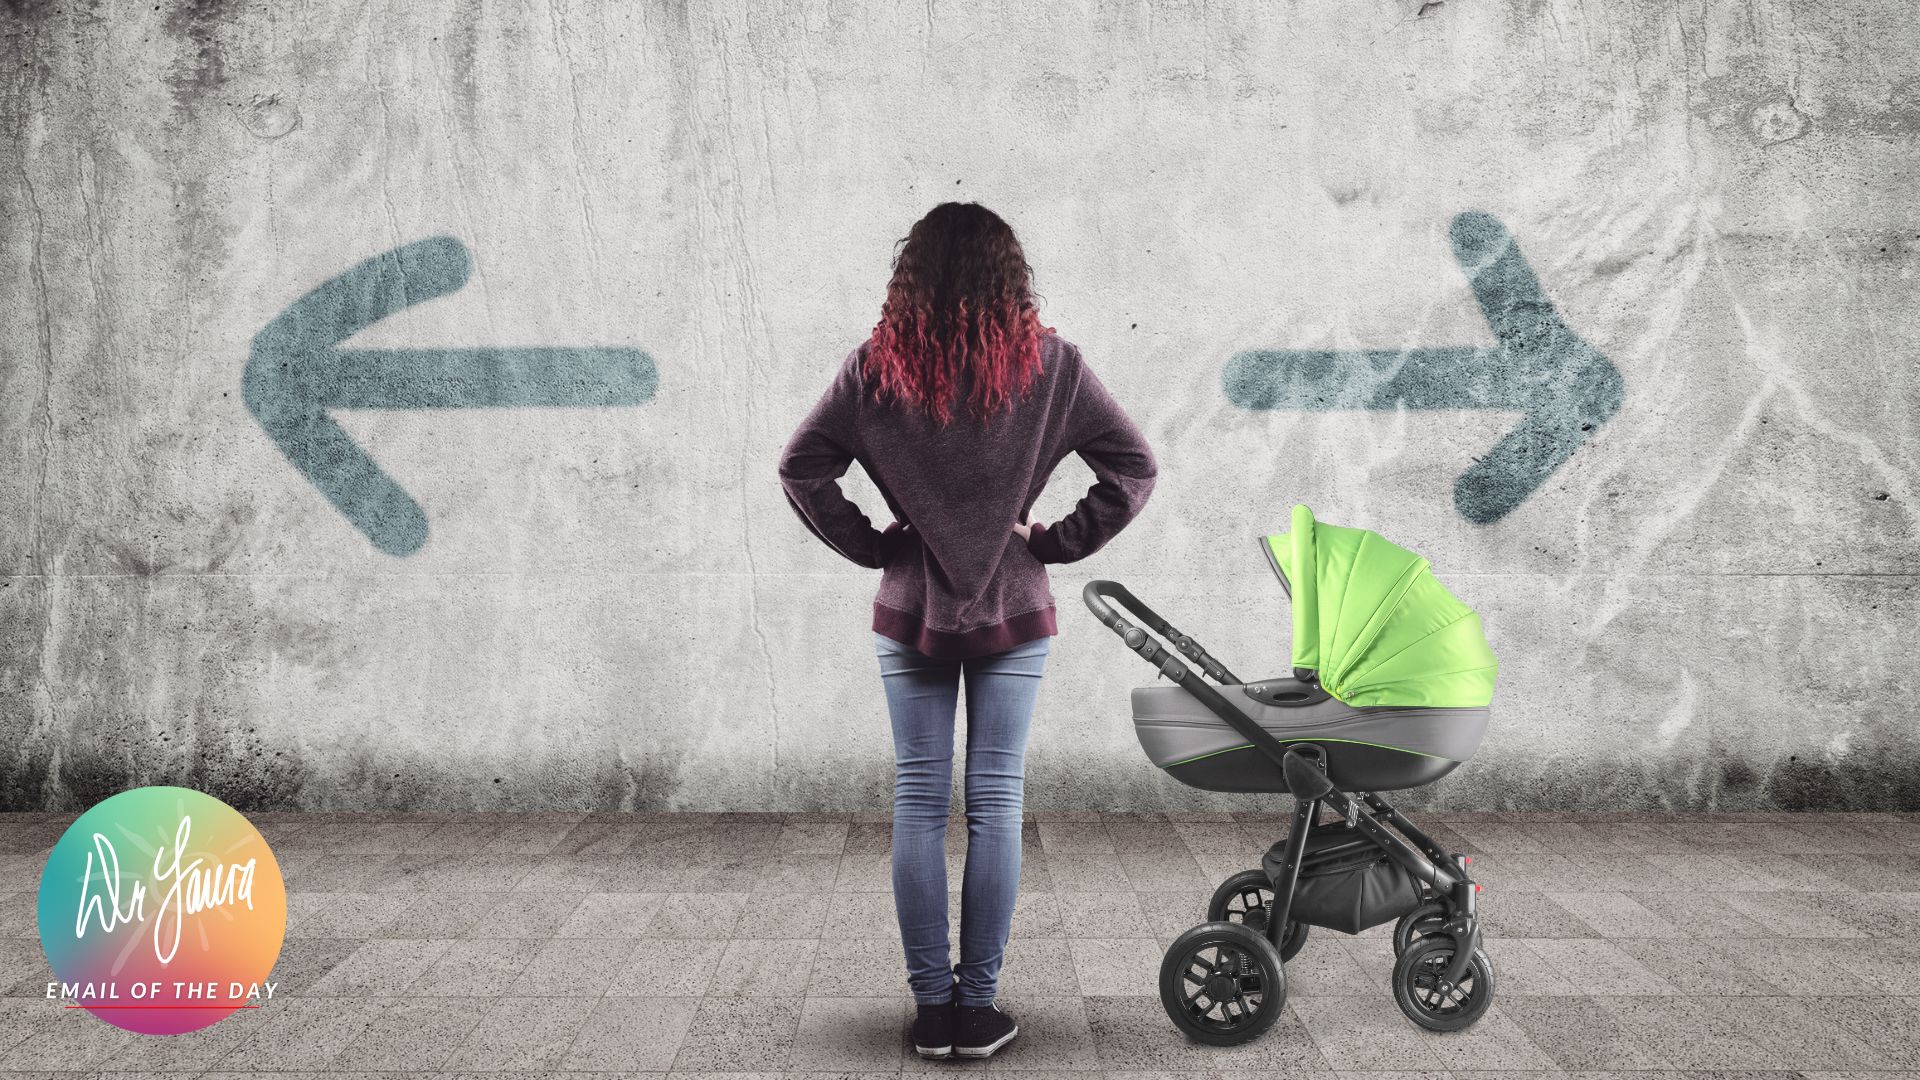 Woman wearing red sweater faces a wall with two arrows in opposite directions as she stands next to a baby stroller